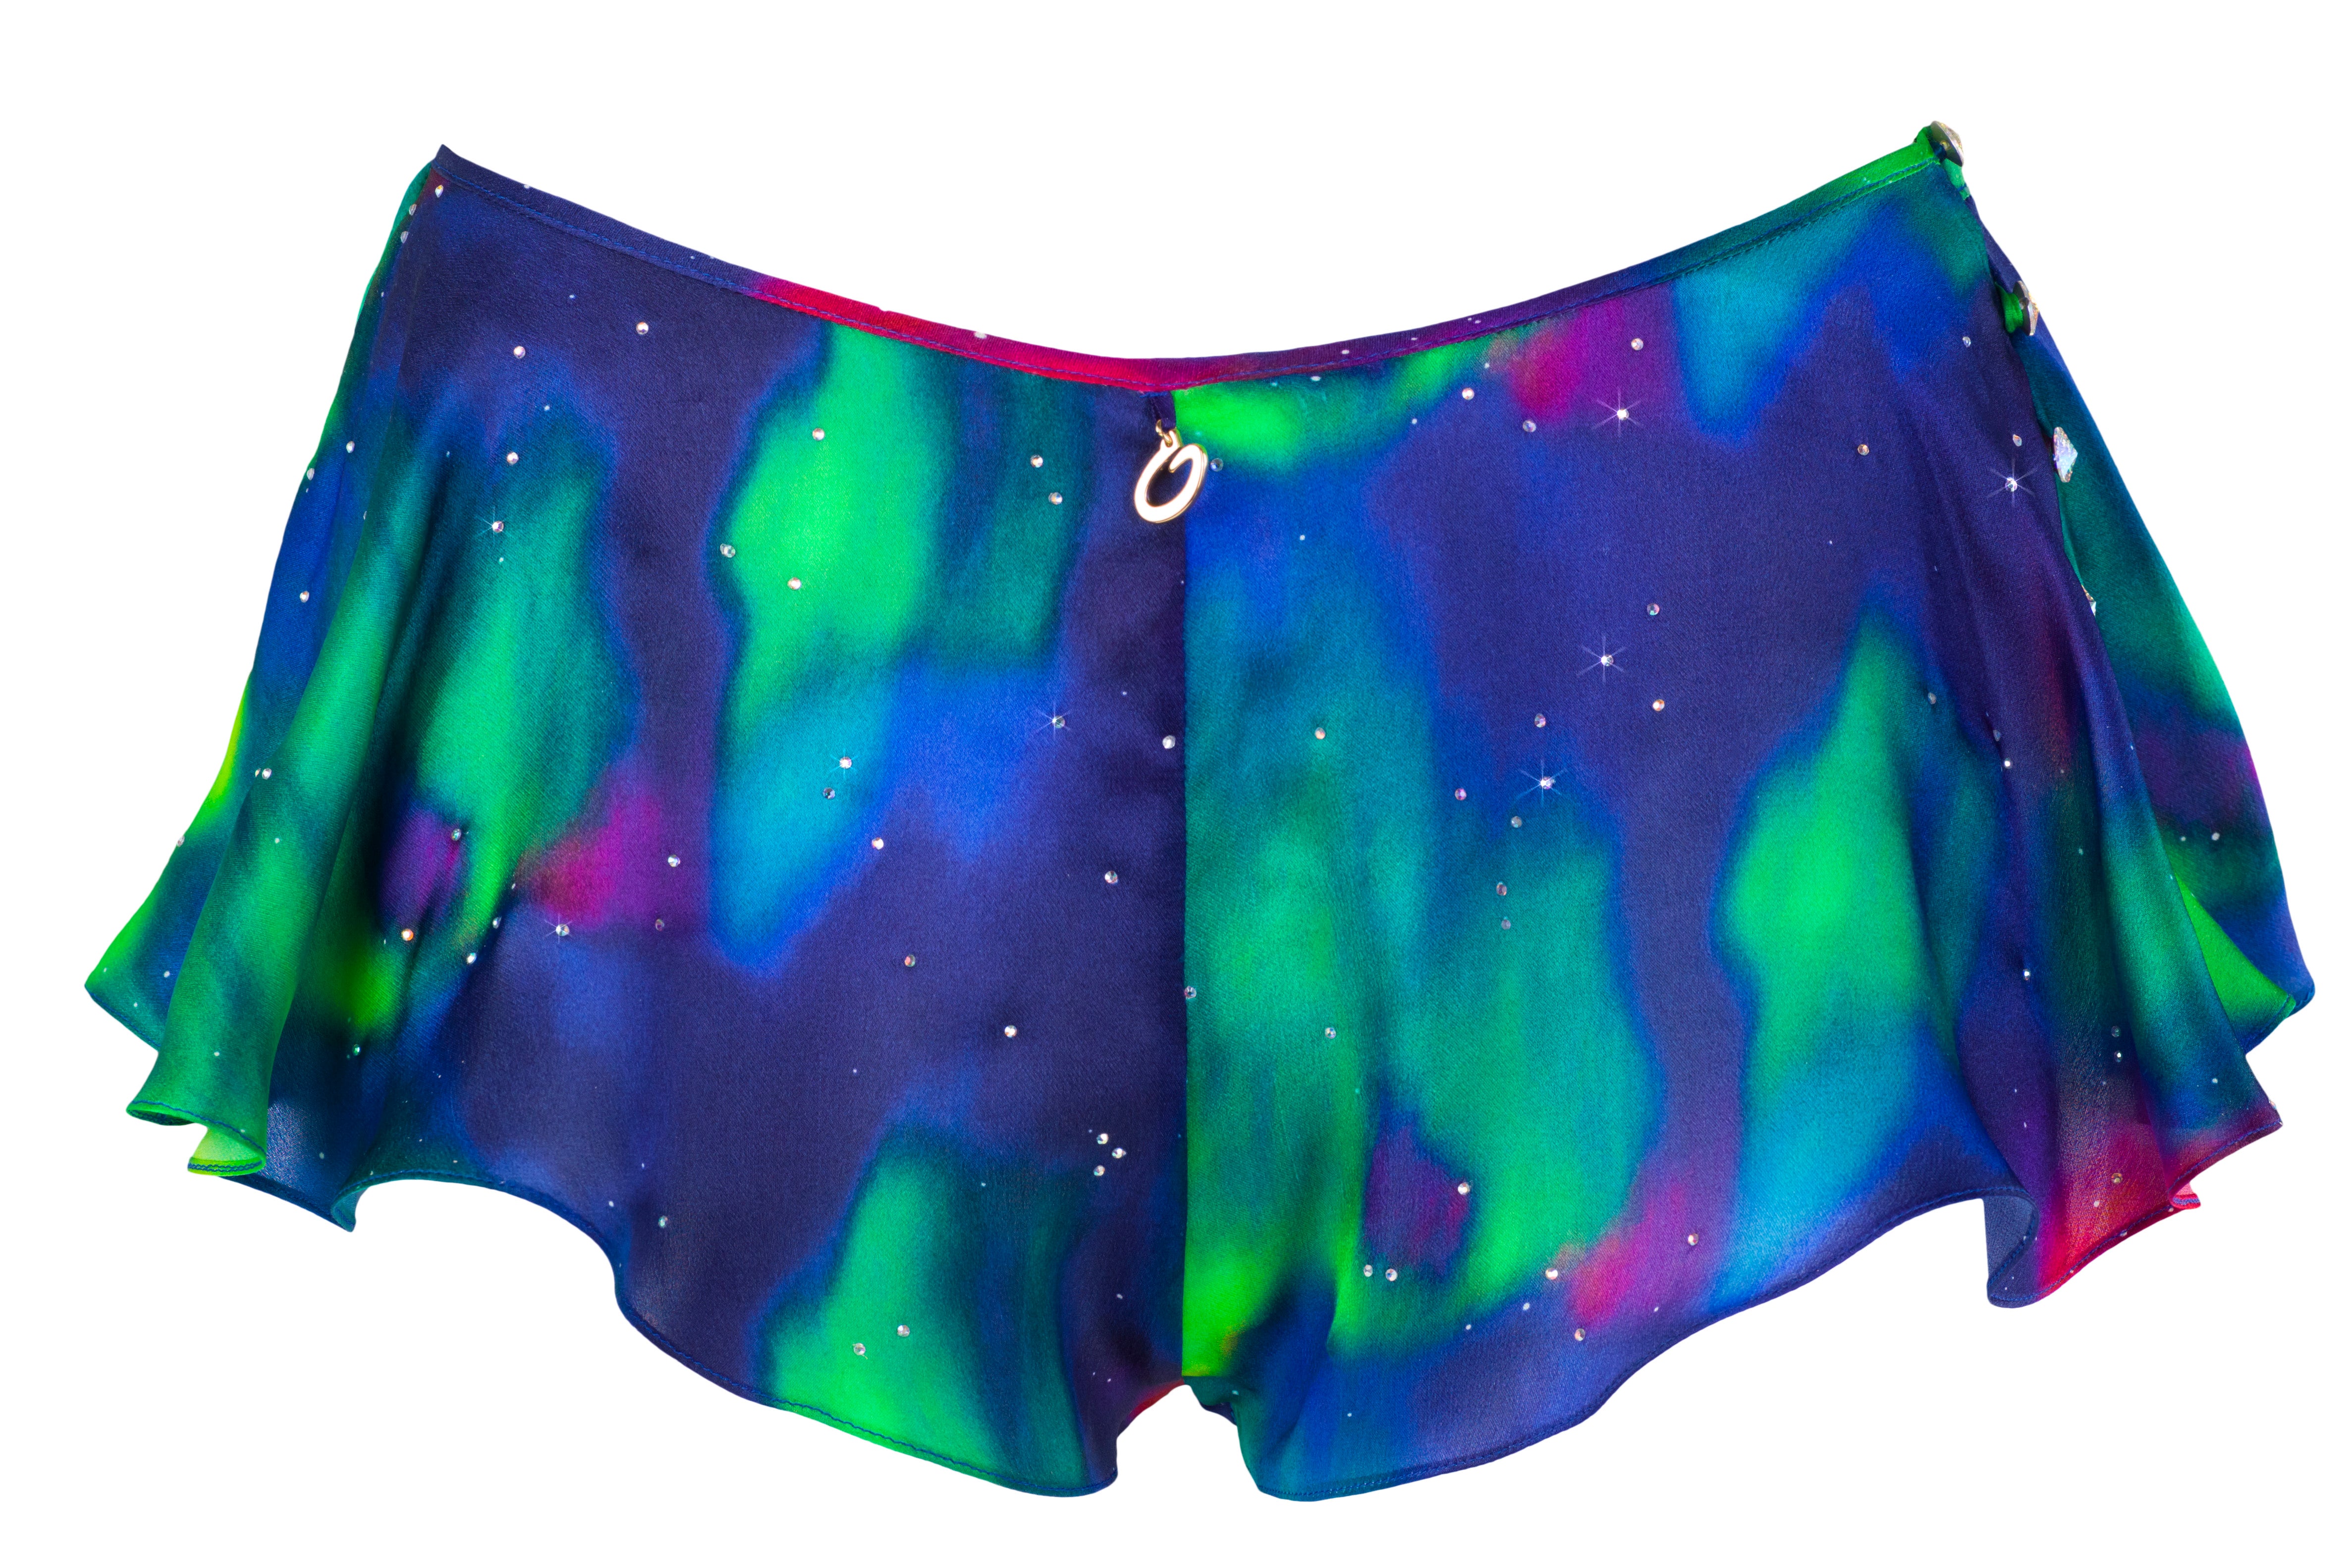 NORTHERN LIGHTS french knicker